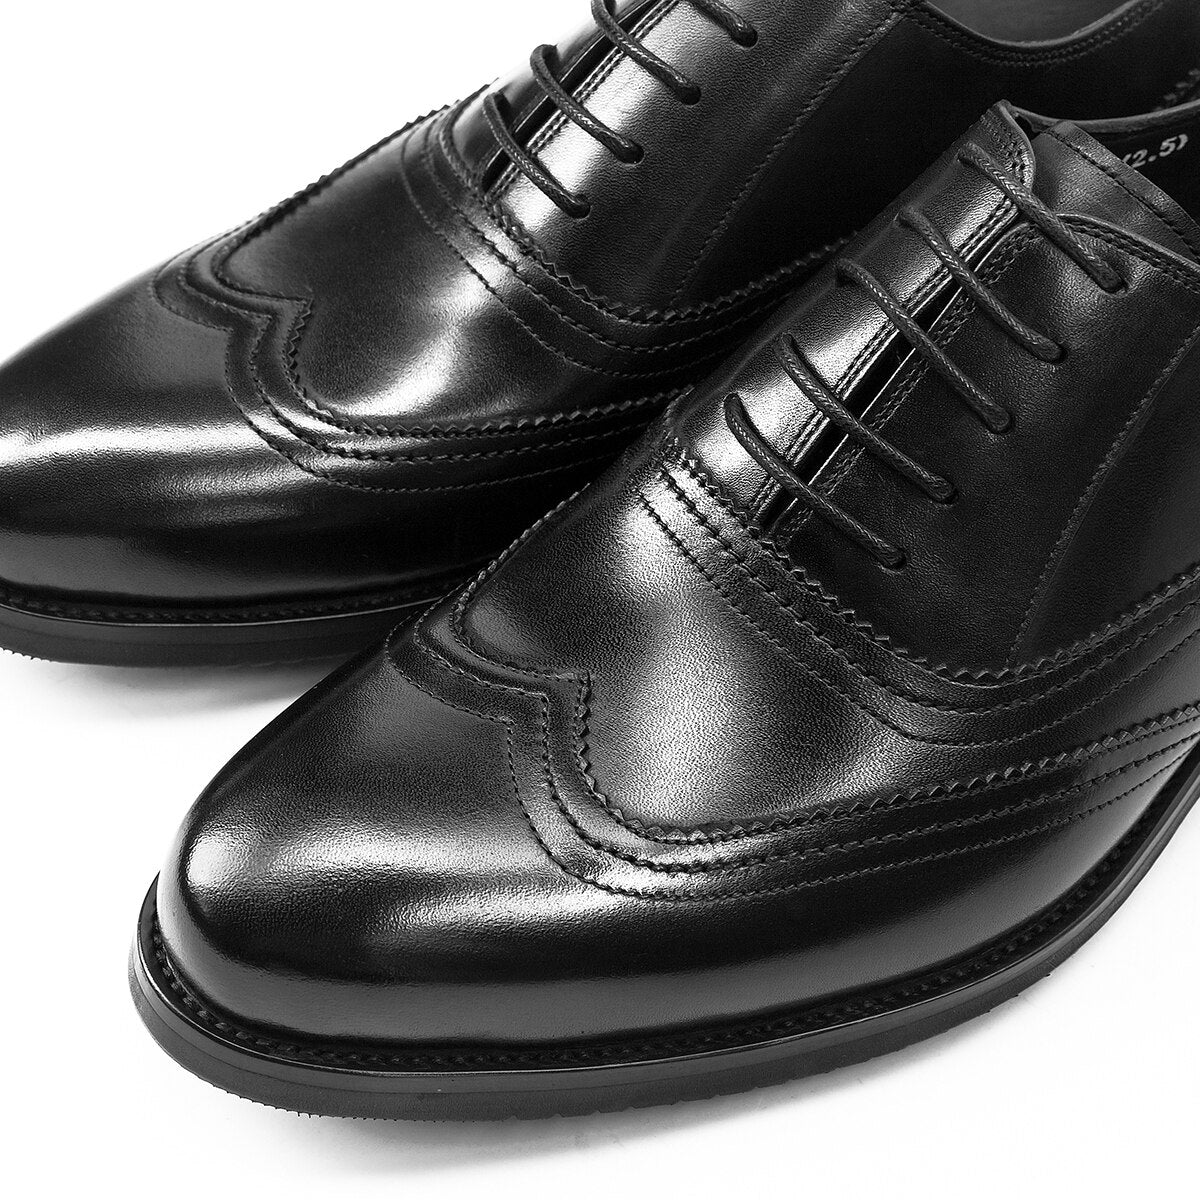 Luxury Handmade Oxfords High Quality Men Shoes Genuine Leather